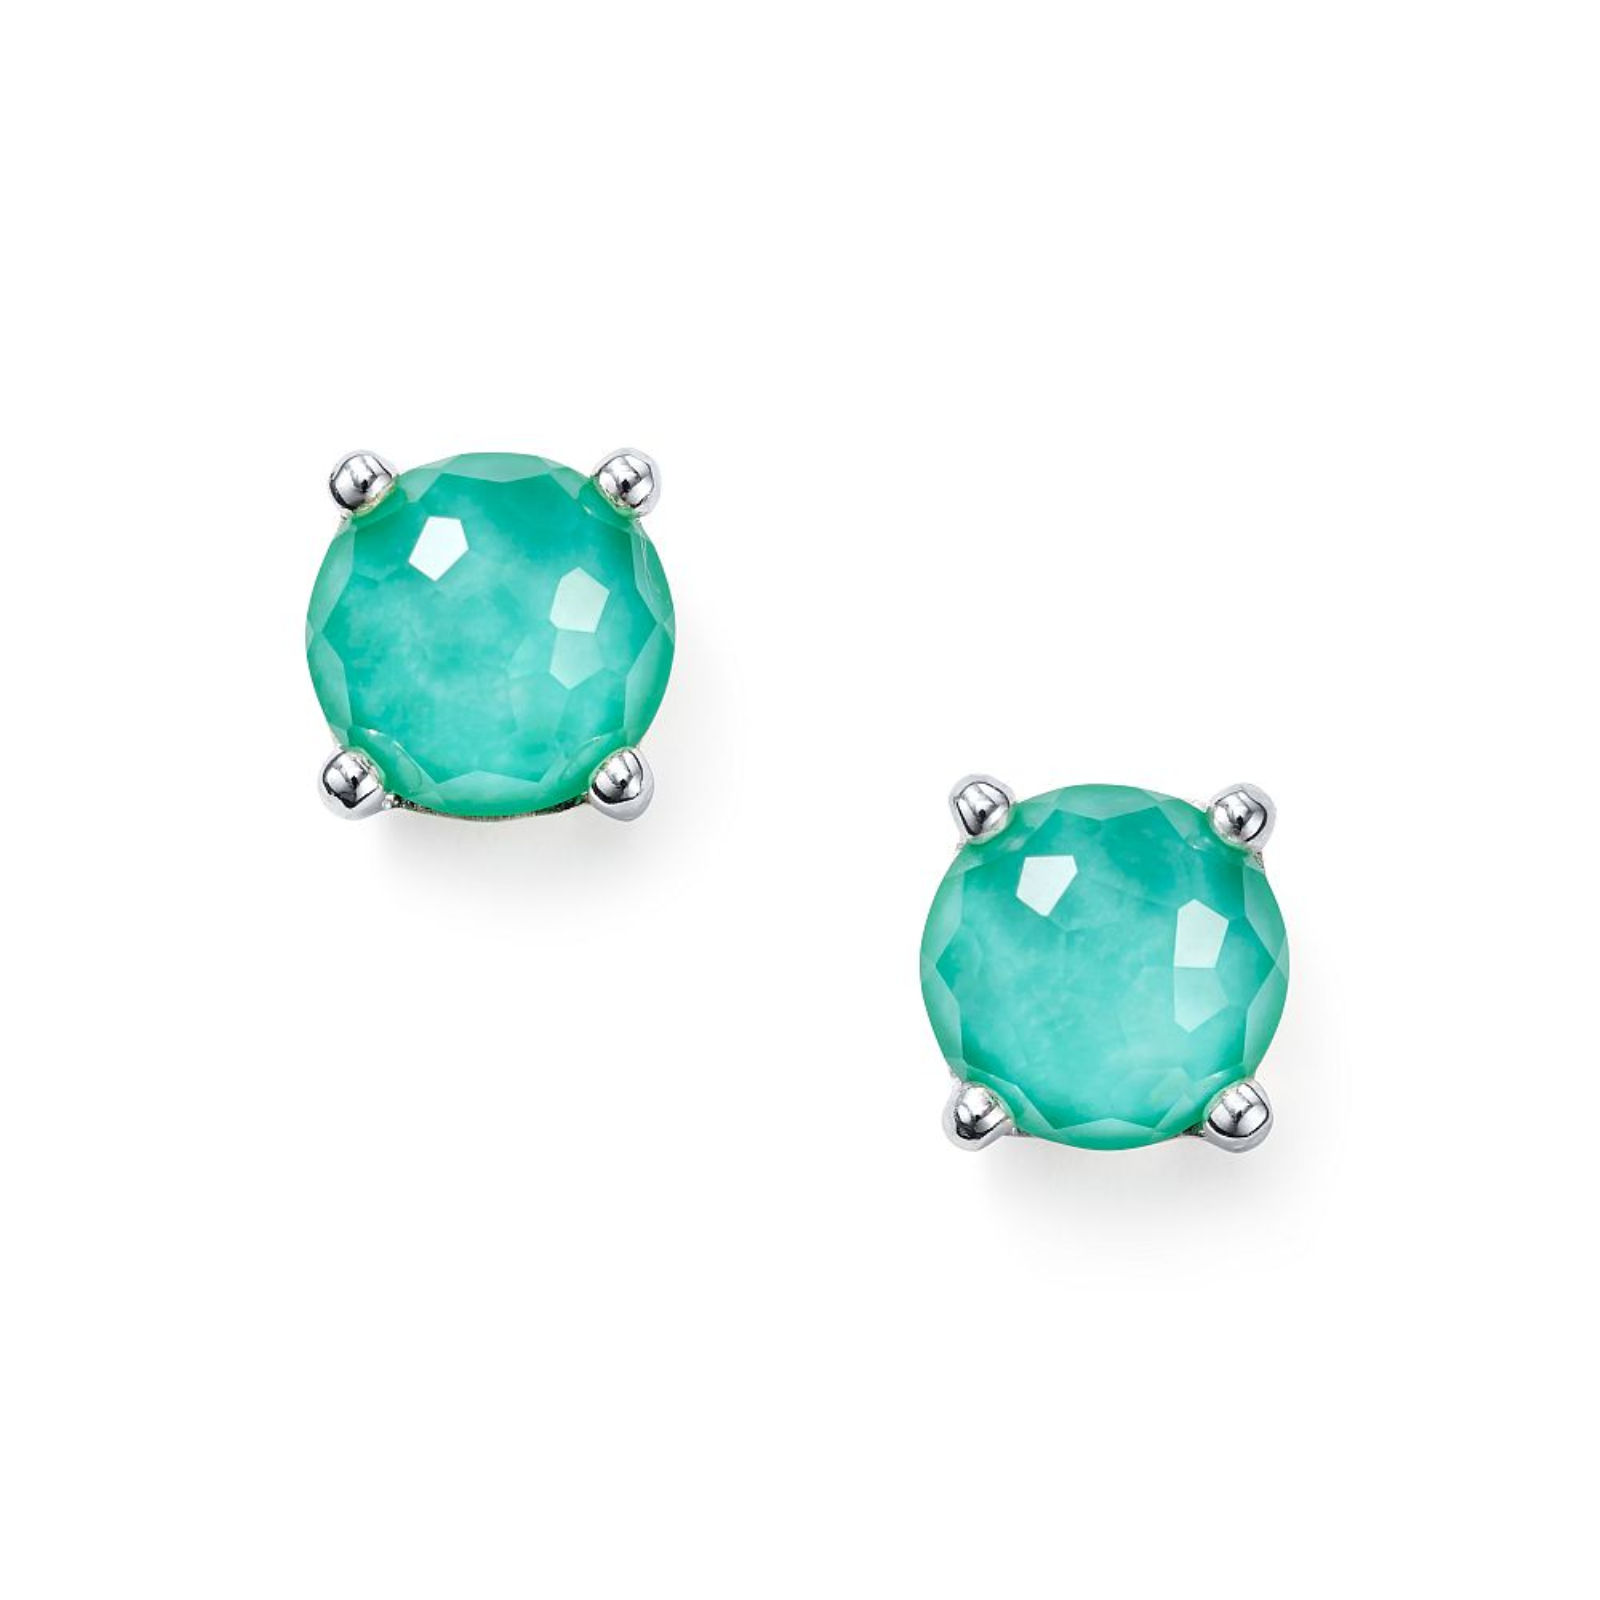 Silver and Turquoise Doublet Rock Candy Stud Earrings